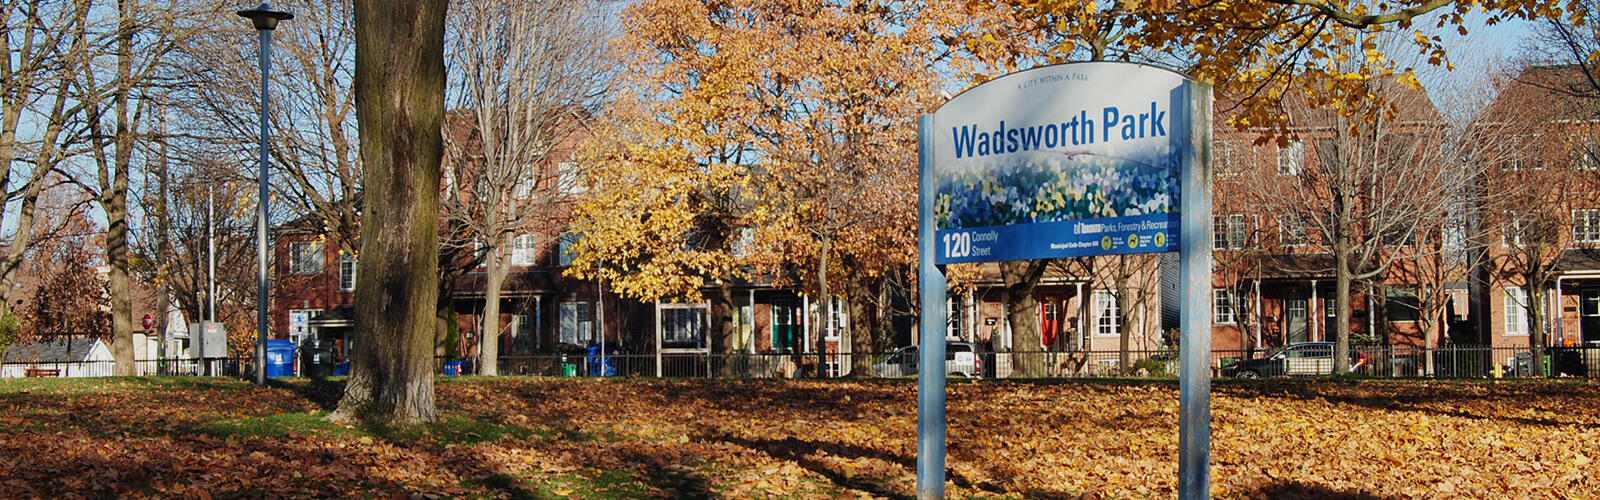 Park sign for Wadsworth Park. The ground is covered in colourful fall leaves that have fallen from the surrounding trees and there are houses in the background.